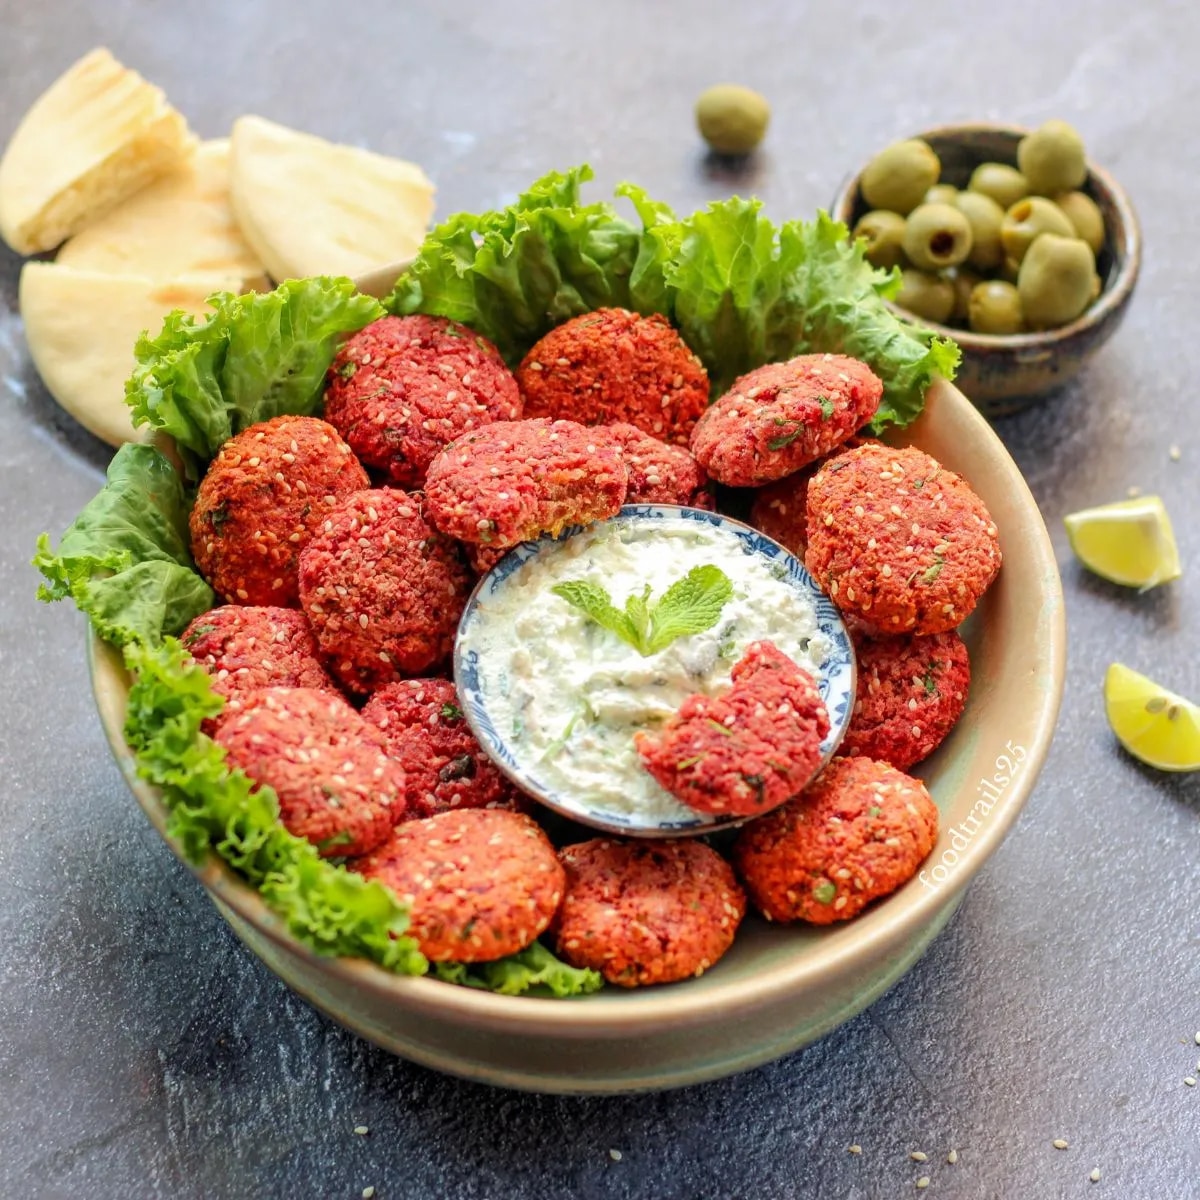 Air fryer falafel with beetroot